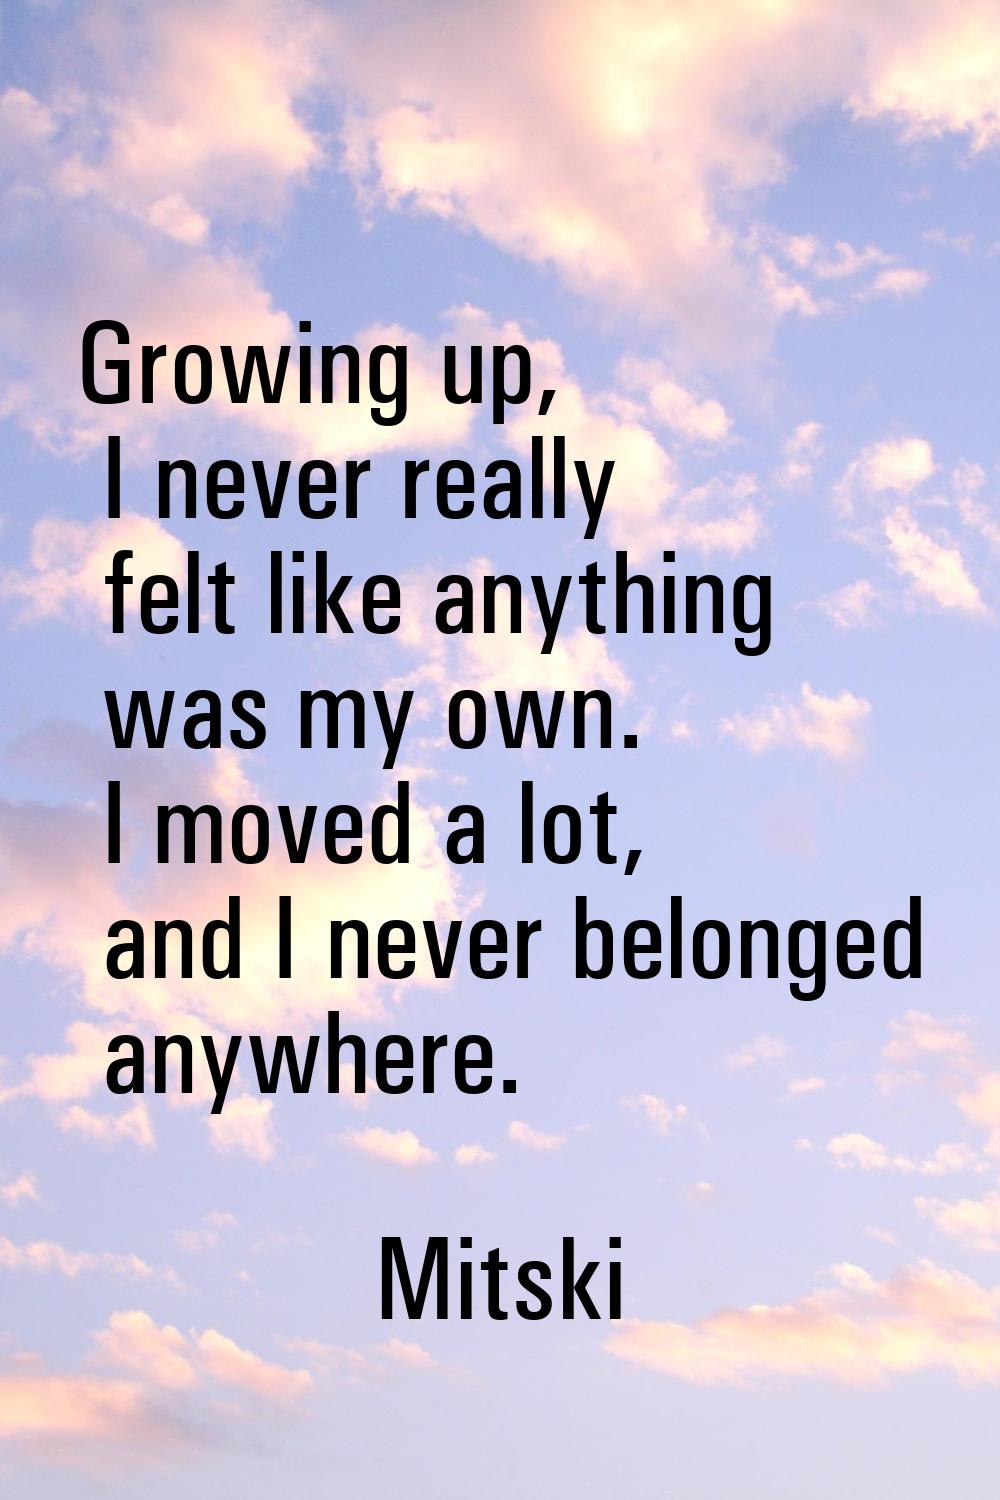 Growing up, I never really felt like anything was my own. I moved a lot, and I never belonged anywh